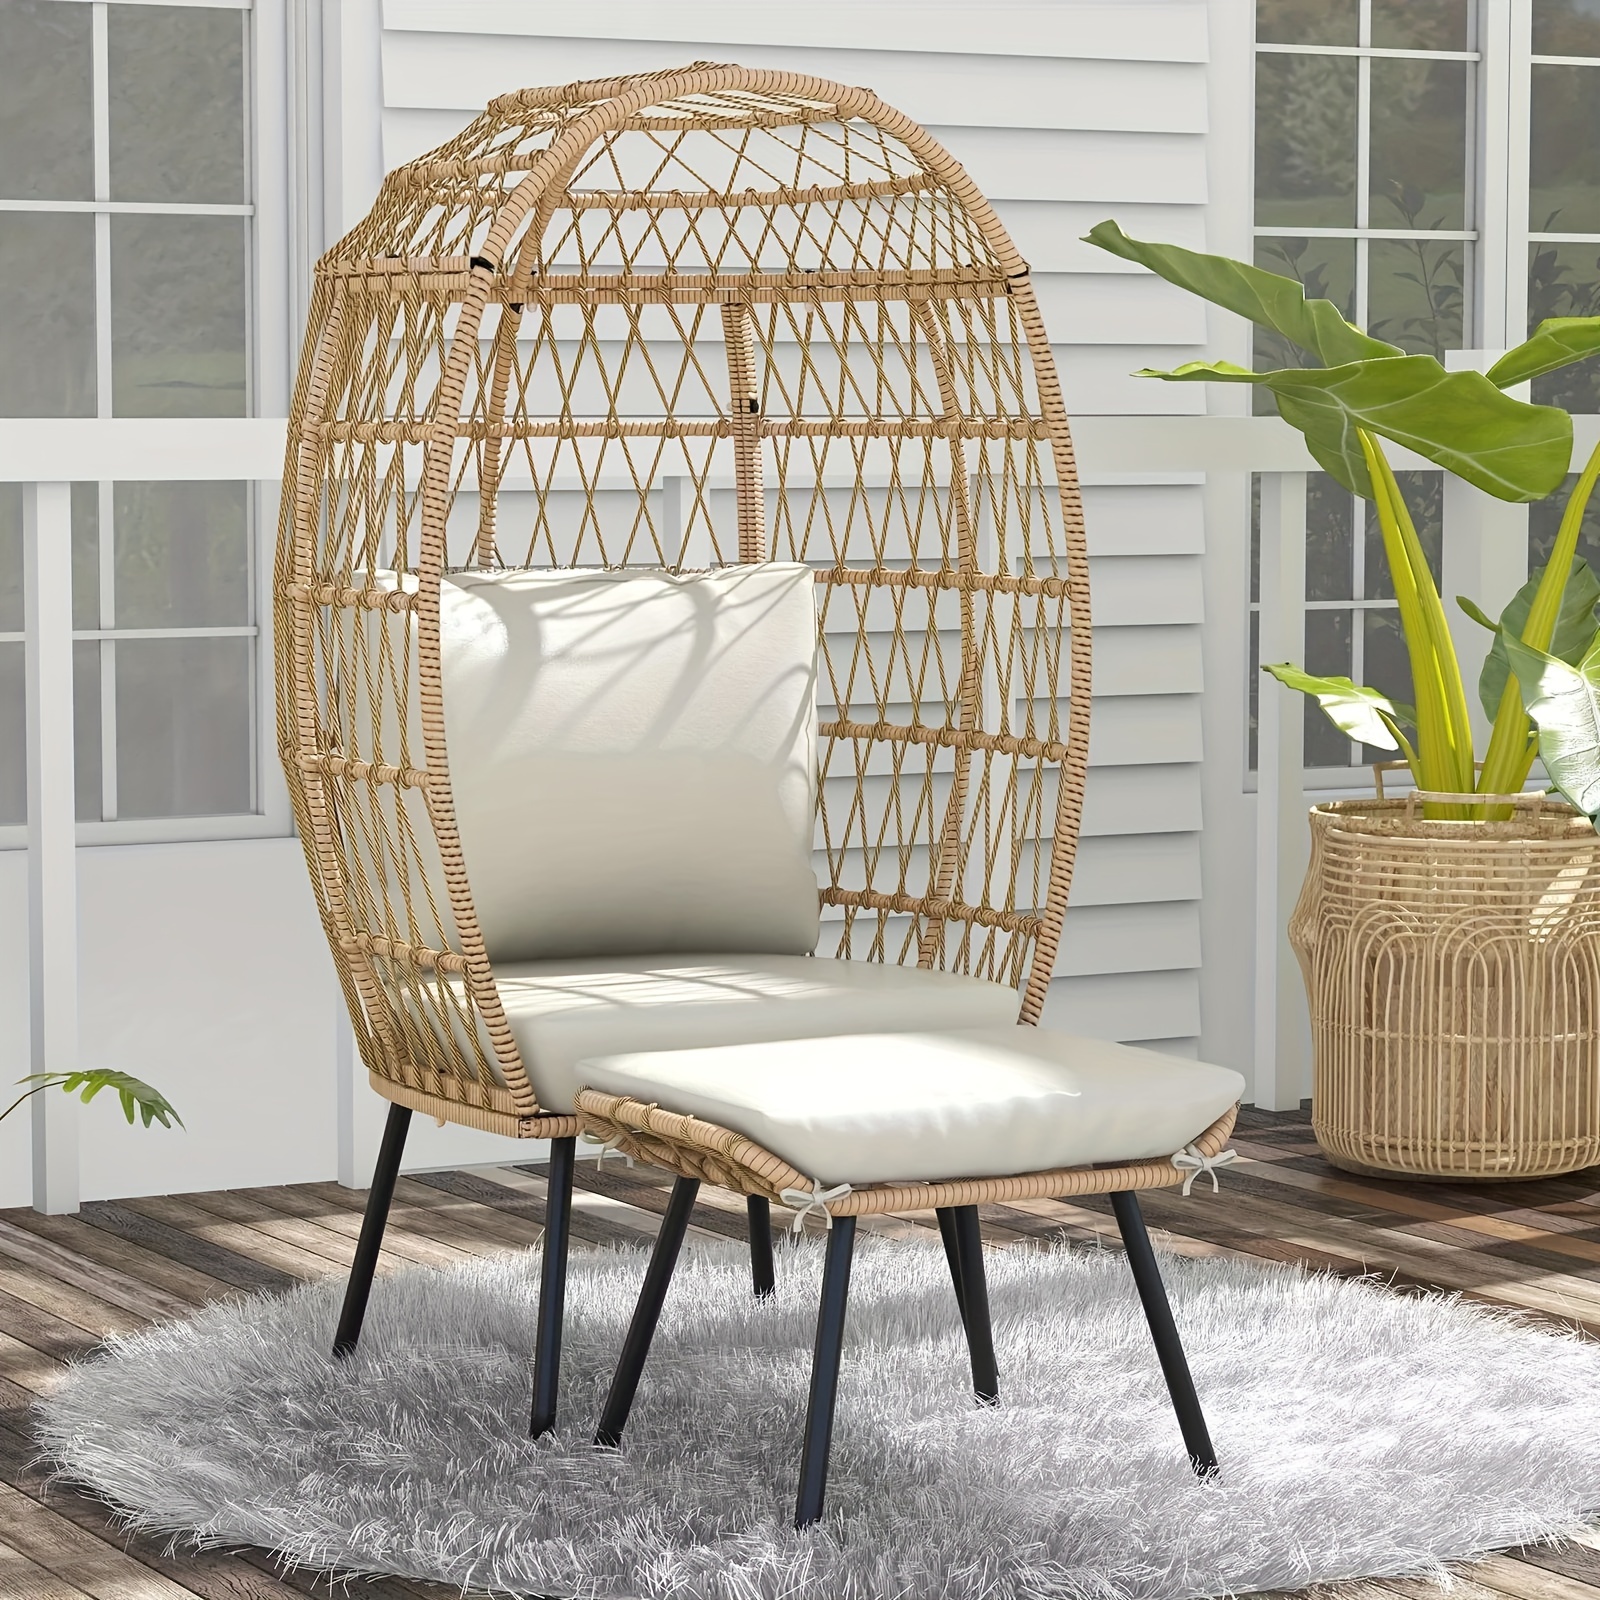 

Dwvo Outdoor Egg Chair With Ottoman For Outdoor Indoor, Wicker Egg Chair With Cushion, All-weather Large Egg Basket Chair For Patio, Outside, Bedroom, Beige